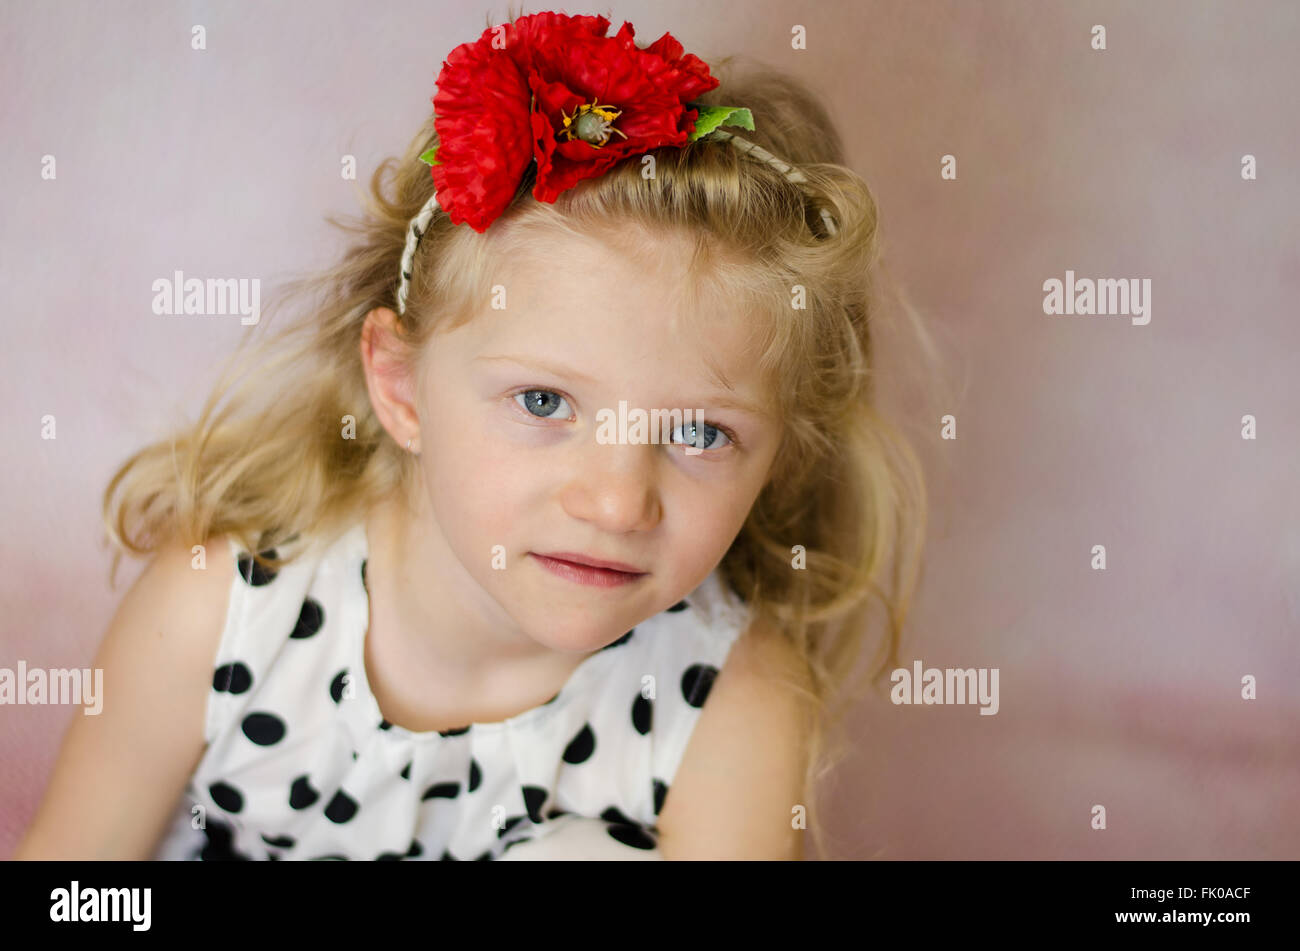 portrait of girl with corn rose in hair and long blond hair Stock Photo